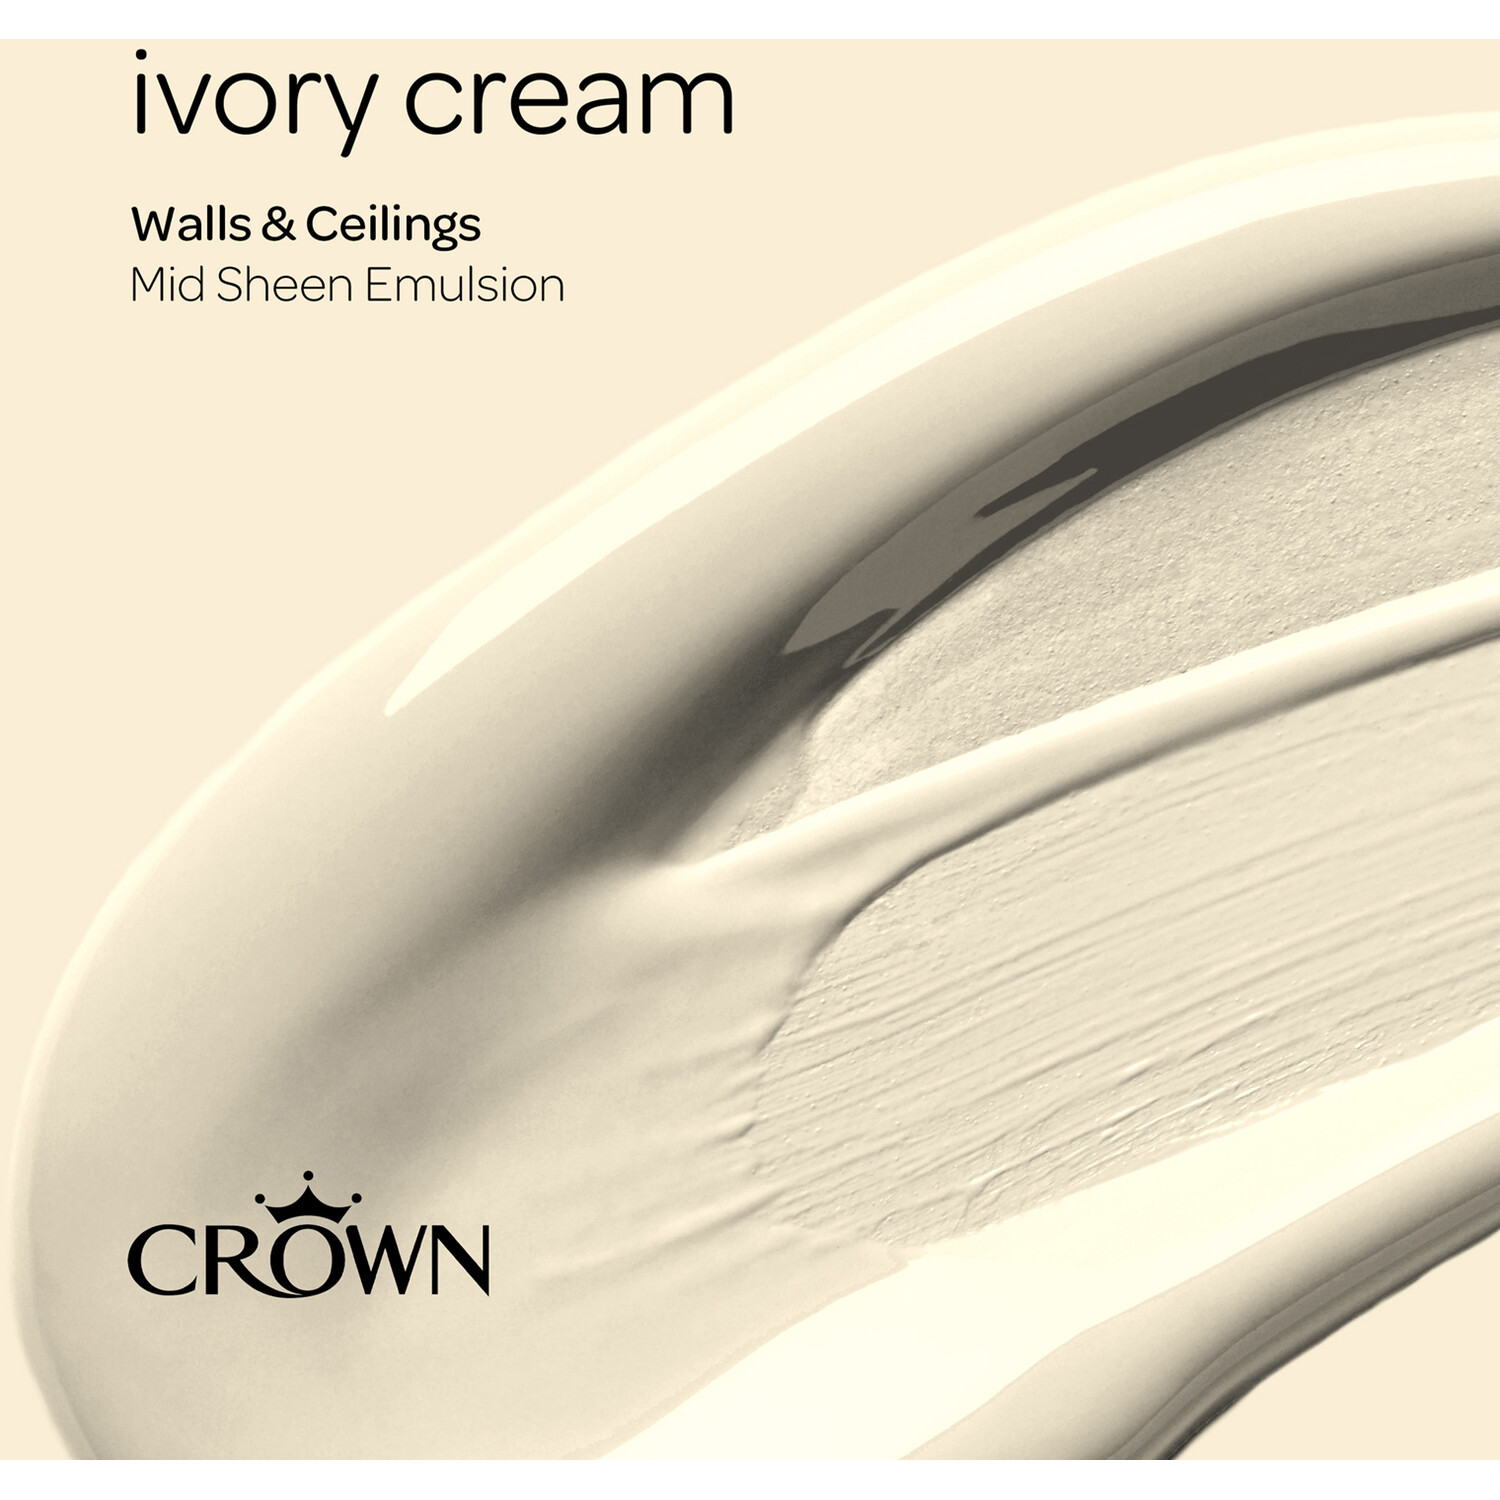 Crown Walls & Ceilings Ivory Cream Mid Sheen Emulsion Paint 2.5L Image 4